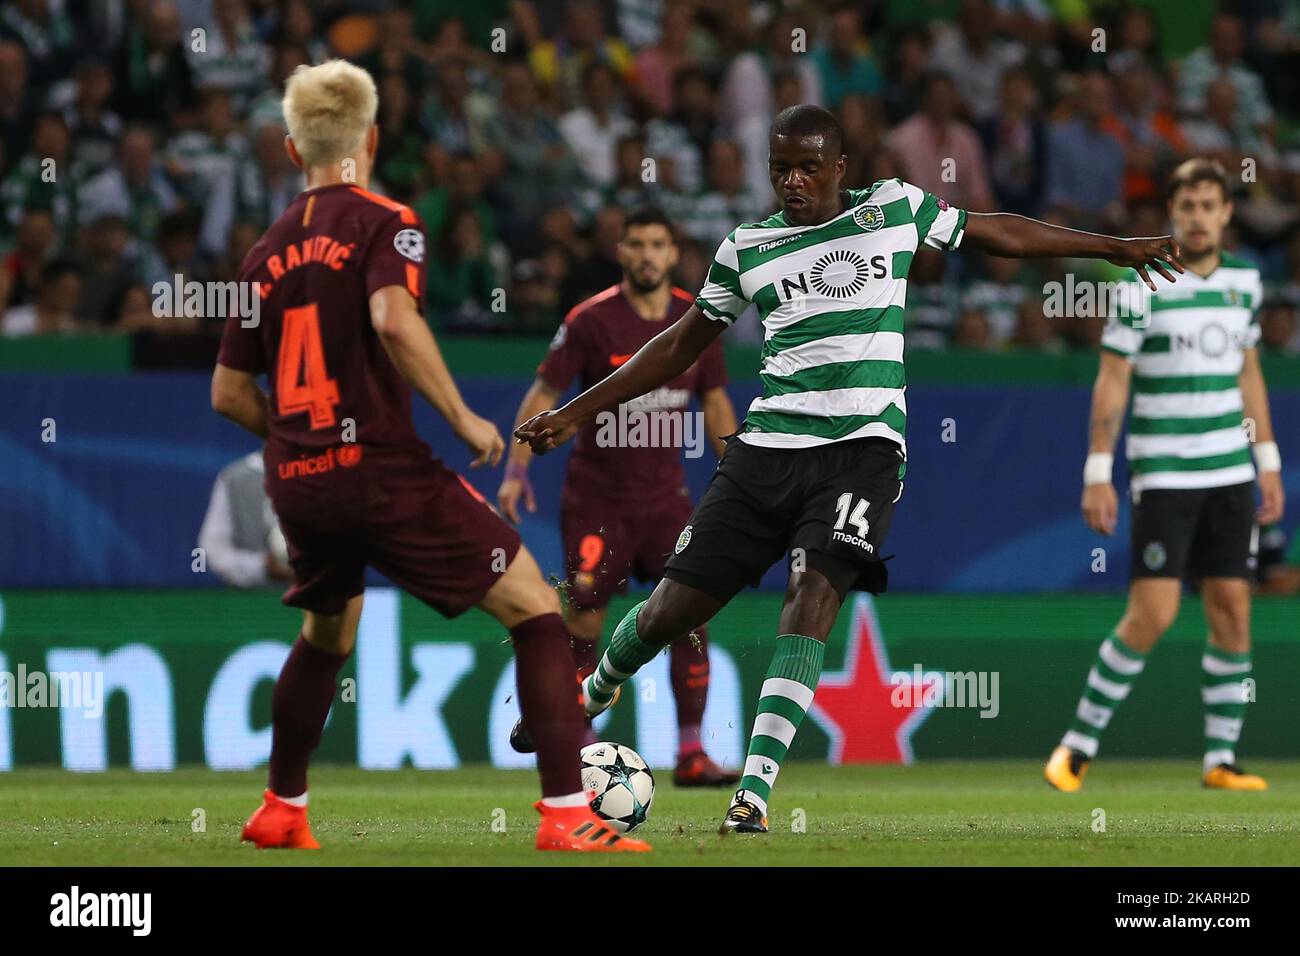 Sportings midfielder William Carvalho from Portugal during the match between Sporting CP v FC Barcelona UEFA Champions League playoff match at Estadio Jose Alvalade on September 27, 2017 in Lisbon, Portugal. (Photo by Bruno Barros / DPI / NurPhoto) Stock Photo